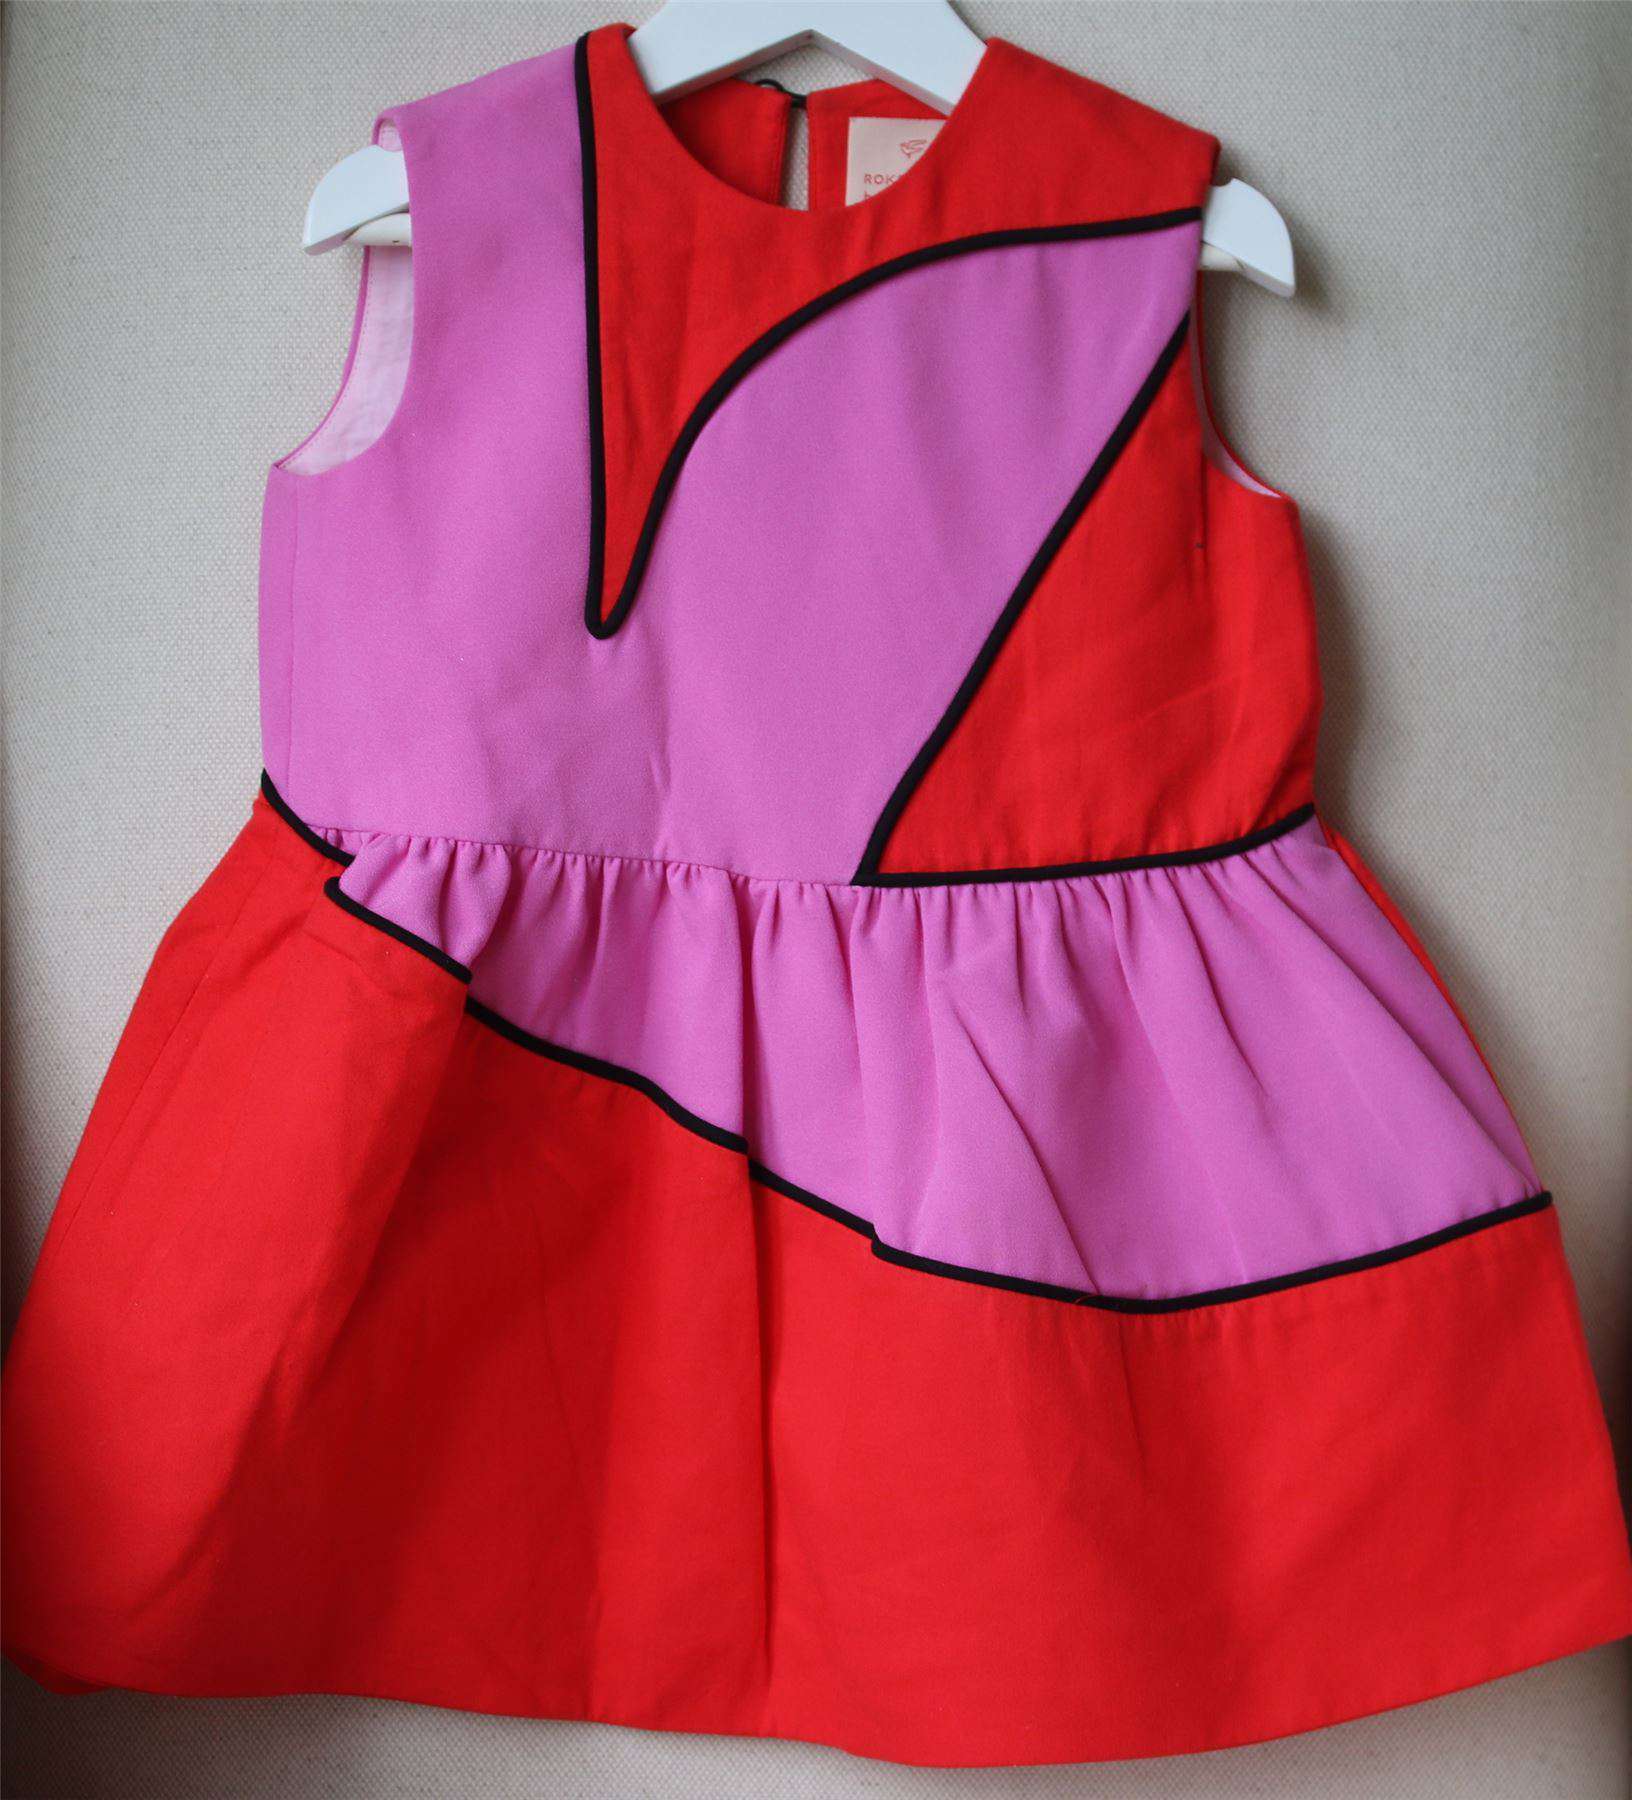 pink and red block dress